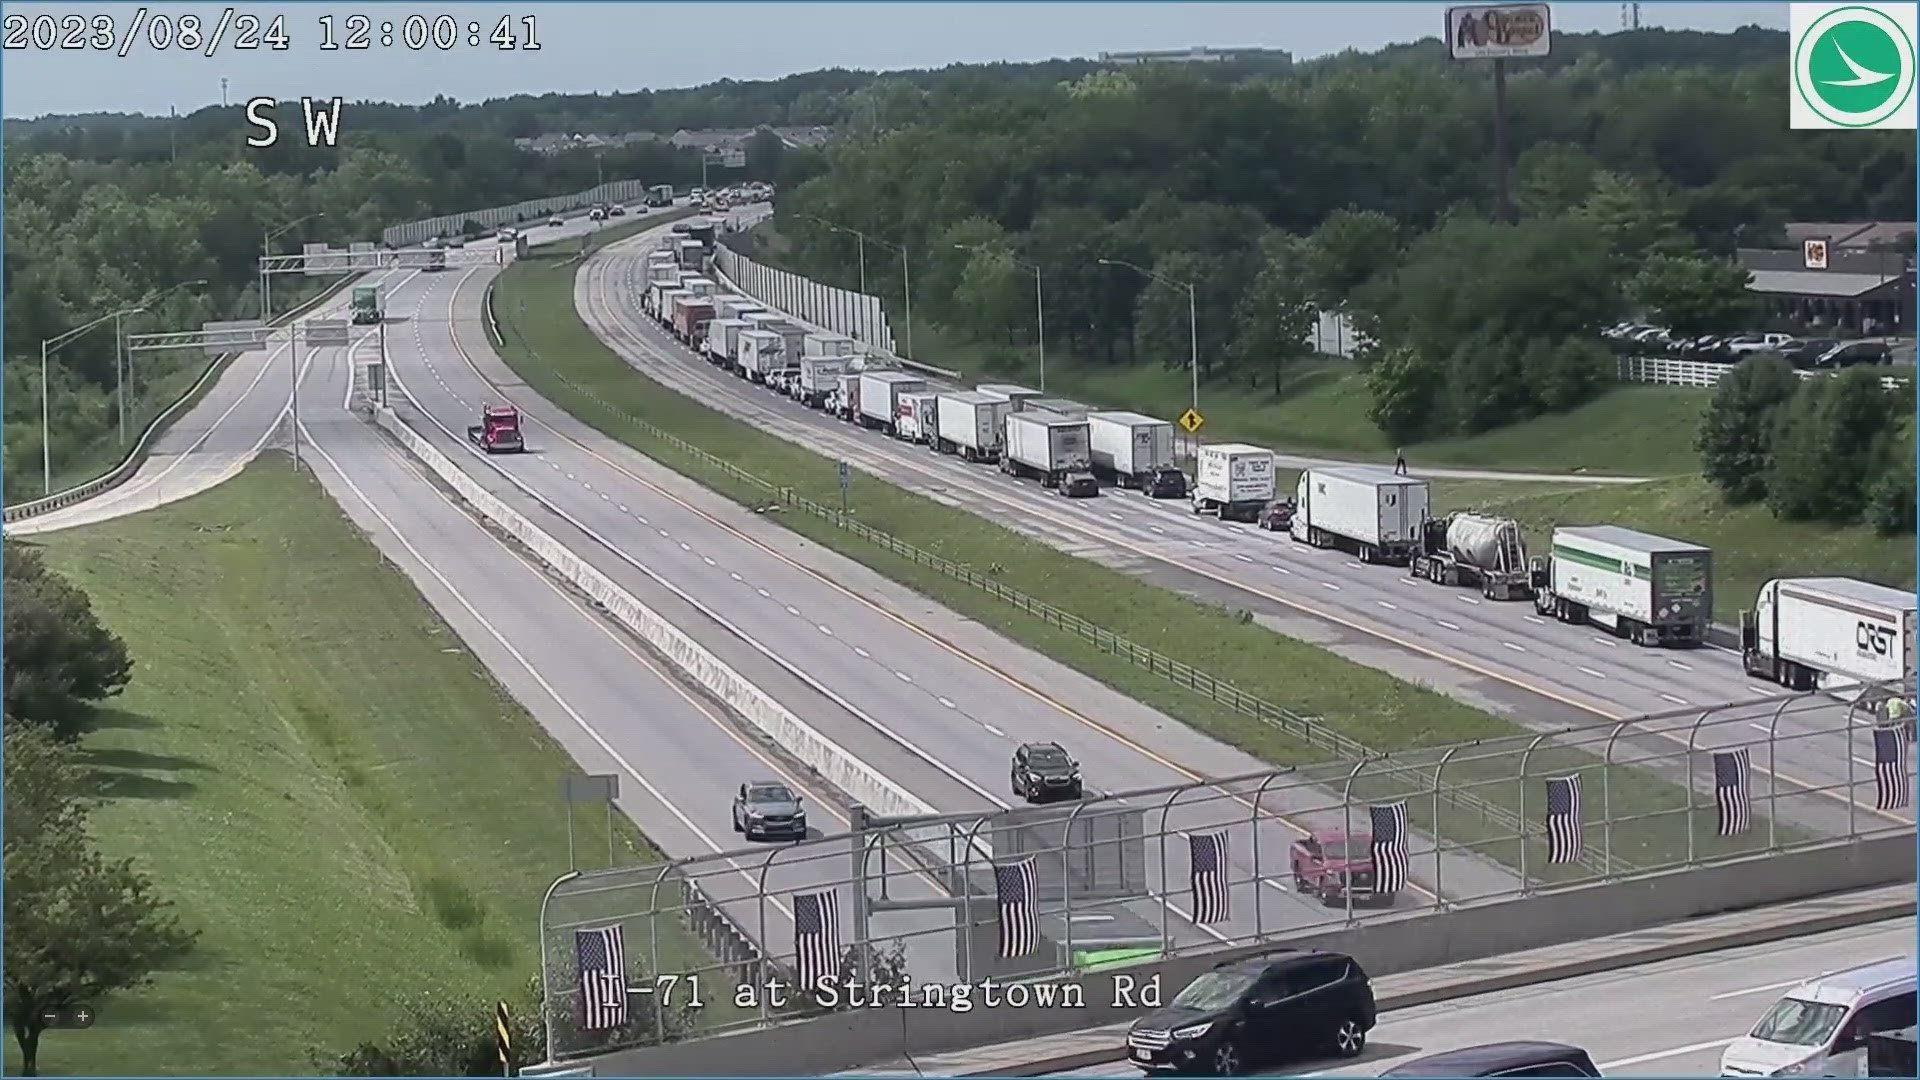 The crash has caused significant backup on the interstate.